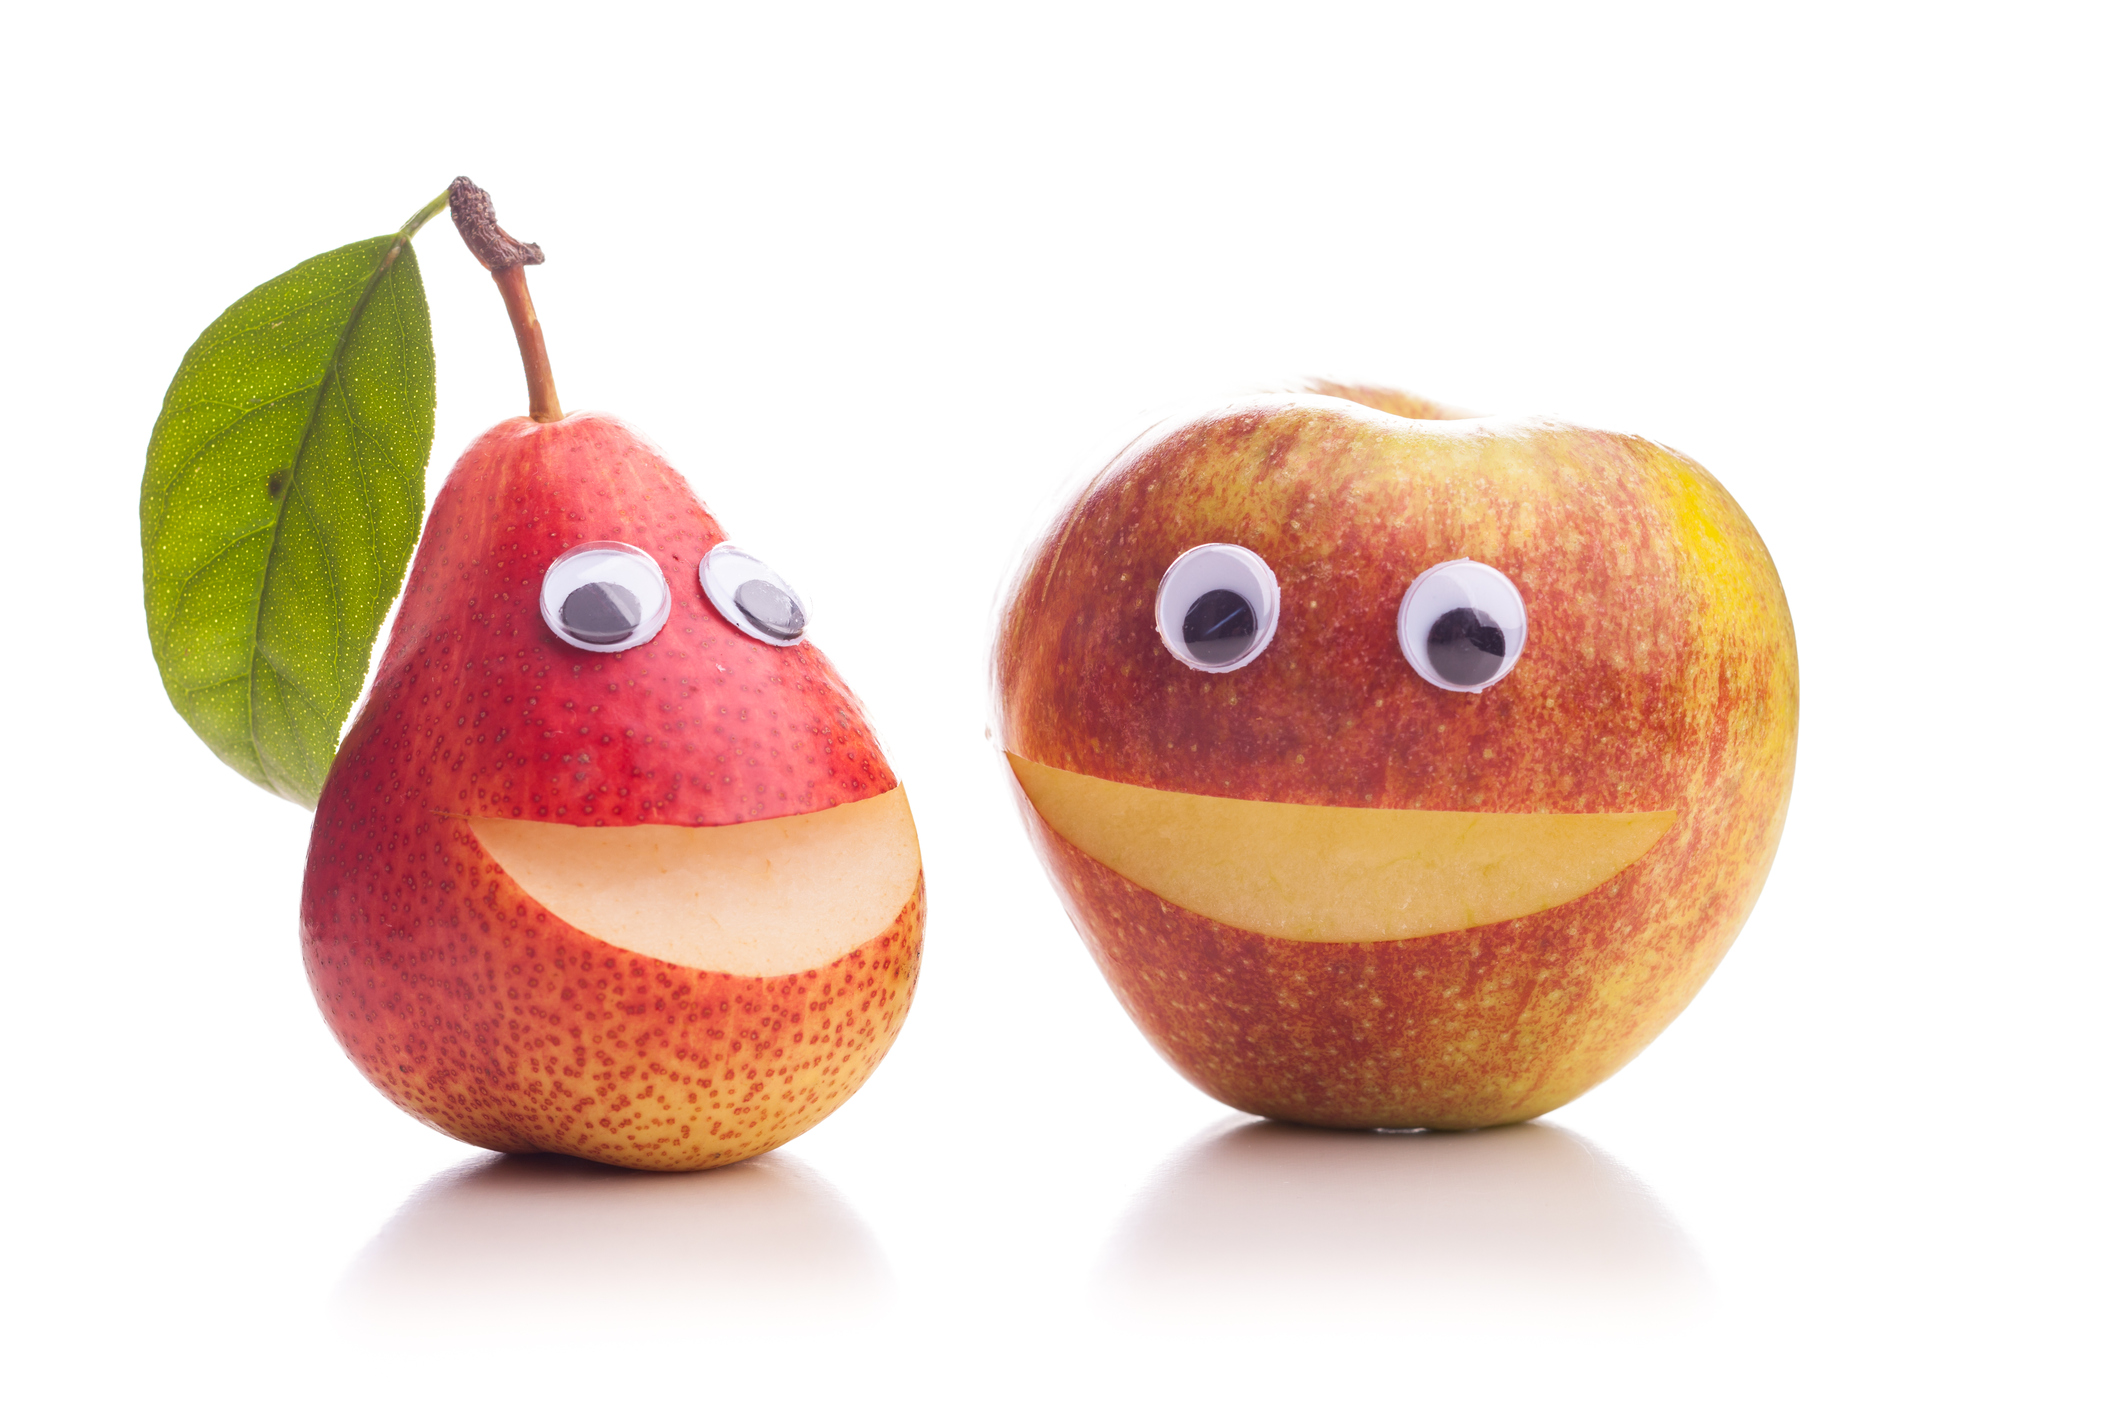 Apple and Pear with goggly eyes